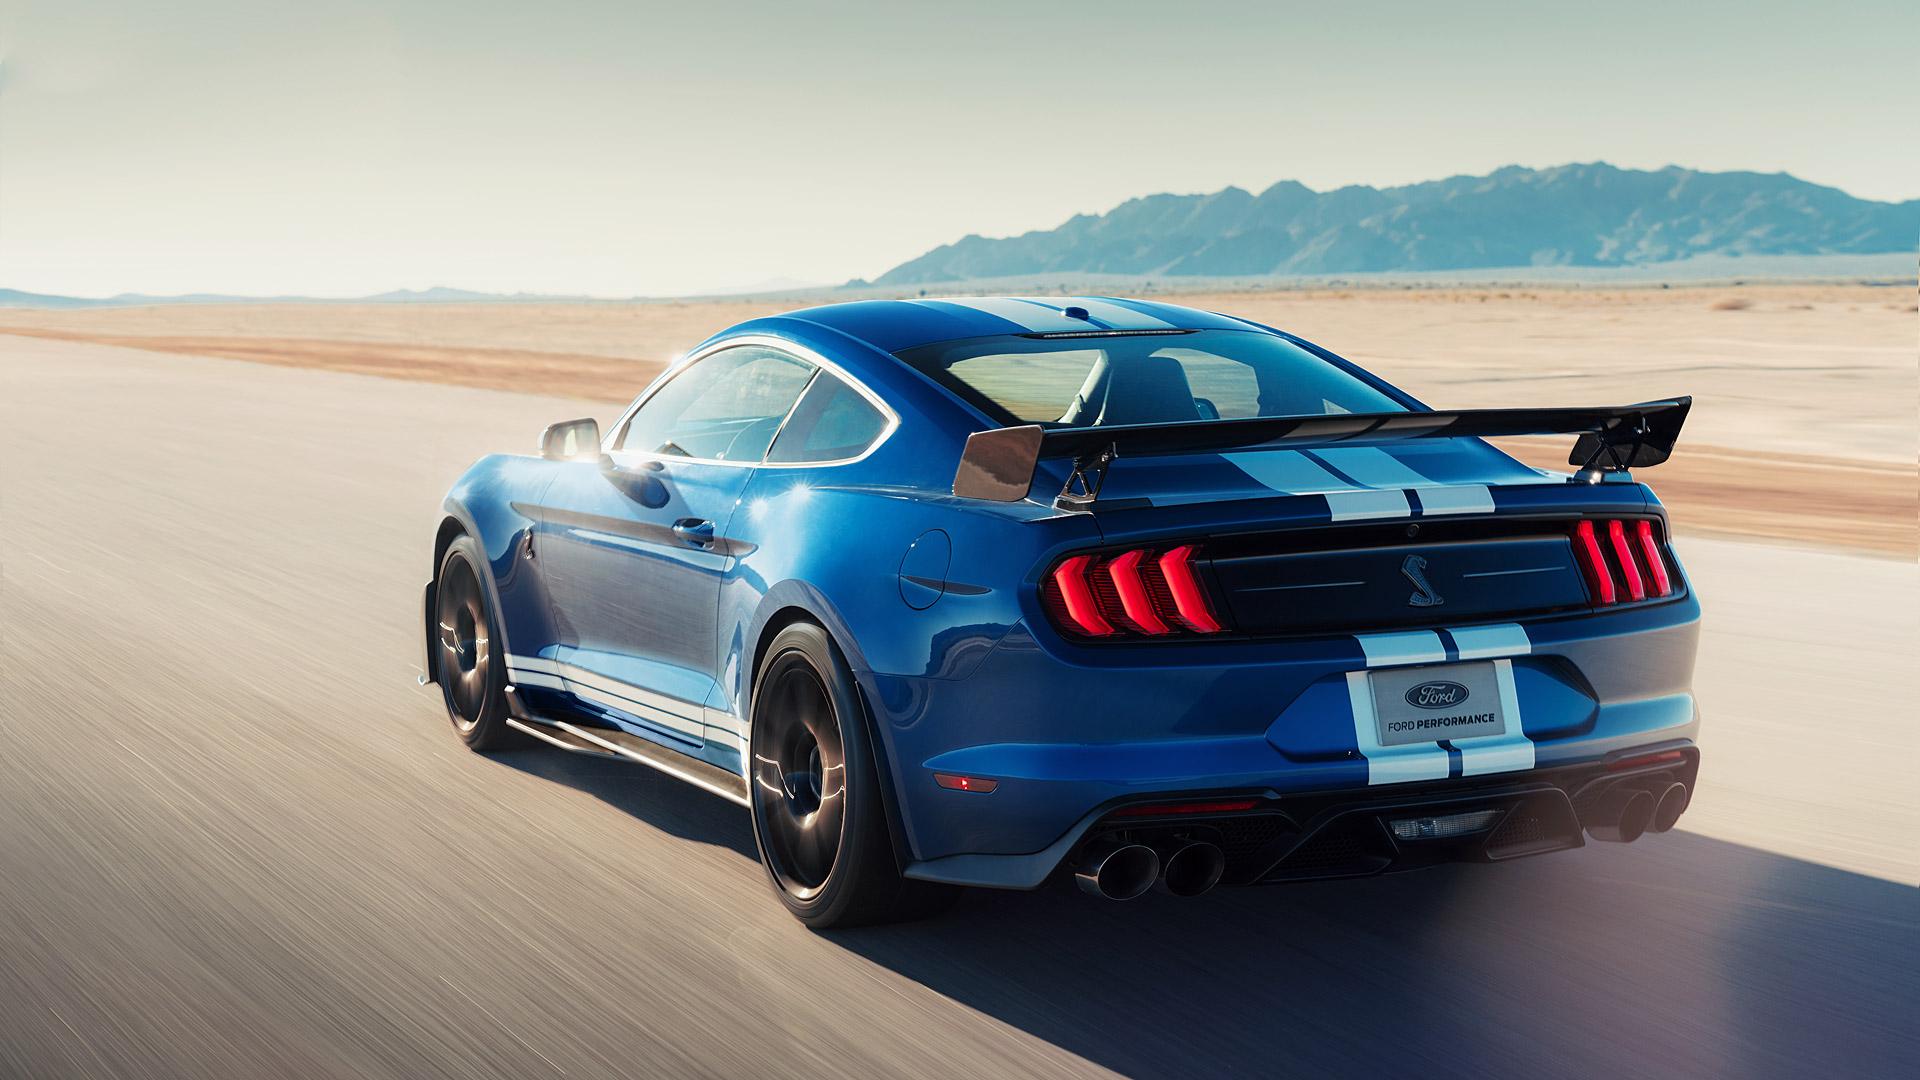 2020 Ford Mustang Shelby GT500 Wallpapers & HD Image